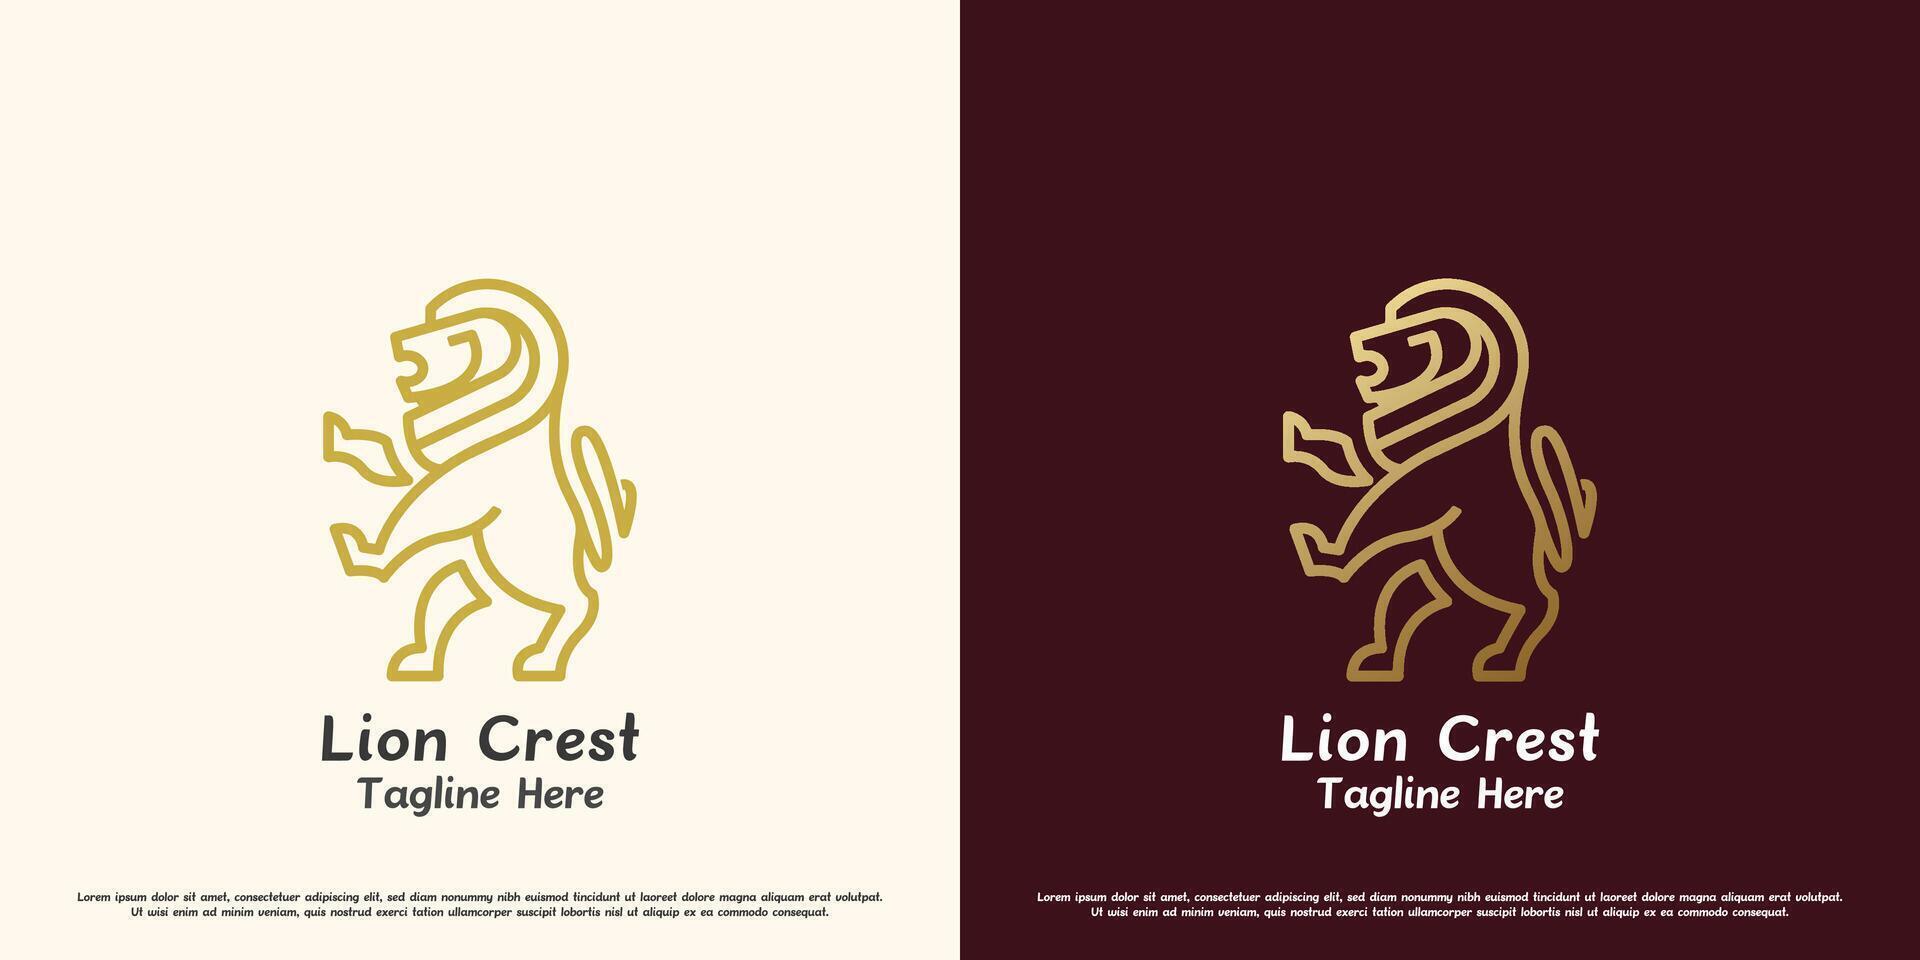 Lion crest logo design illustration. Silhouette of a lion tail standing roaring wild animal king of the jungle predator fangs claws brave. Minimalist elegant luxury pride honor simple icon symbol. vector